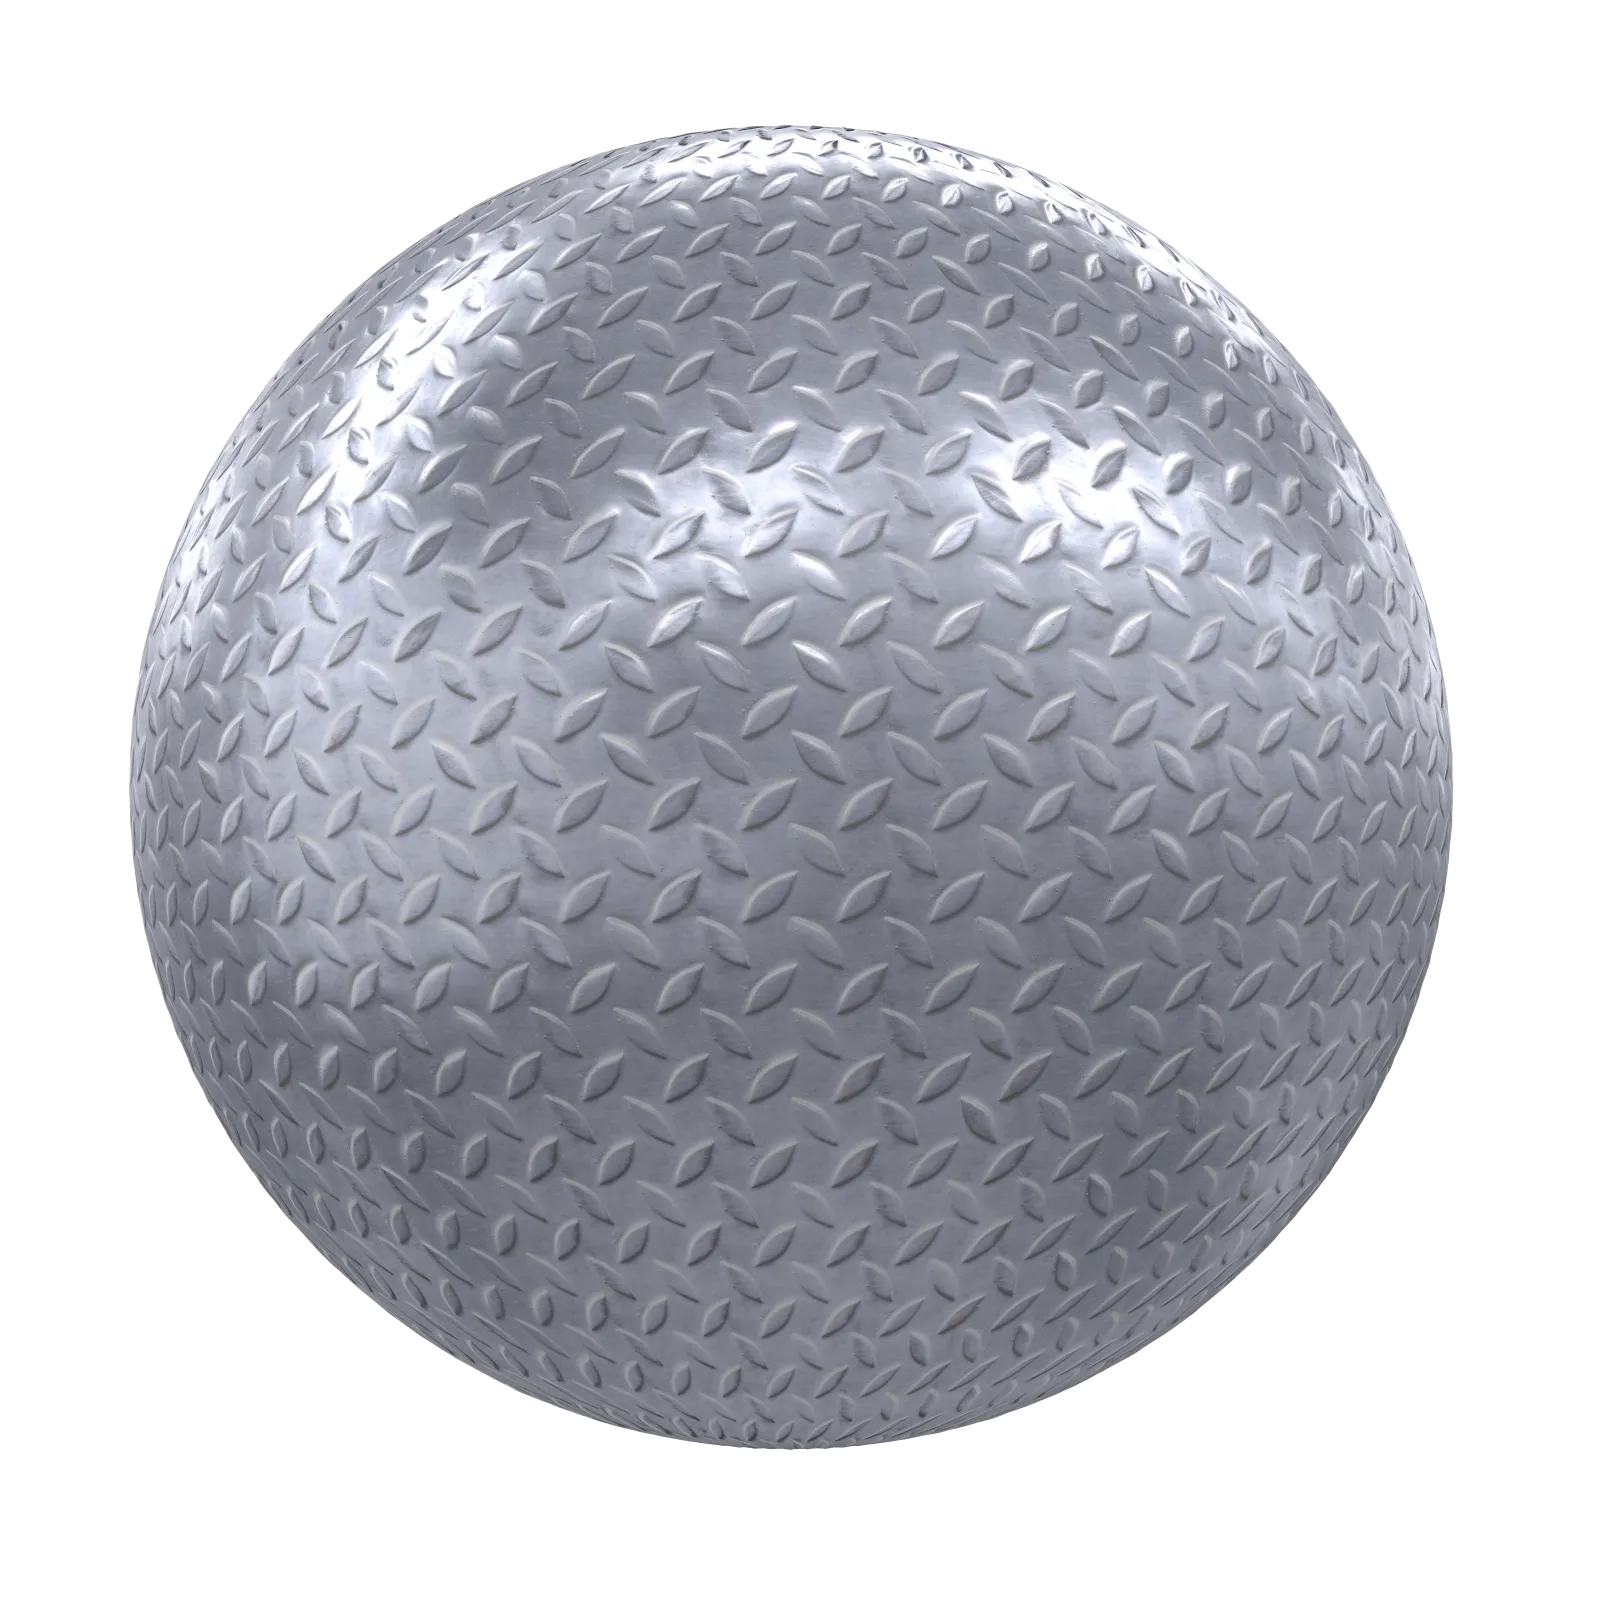 PBR CGAXIS TEXTURES – METALS – Patterned Metal 03